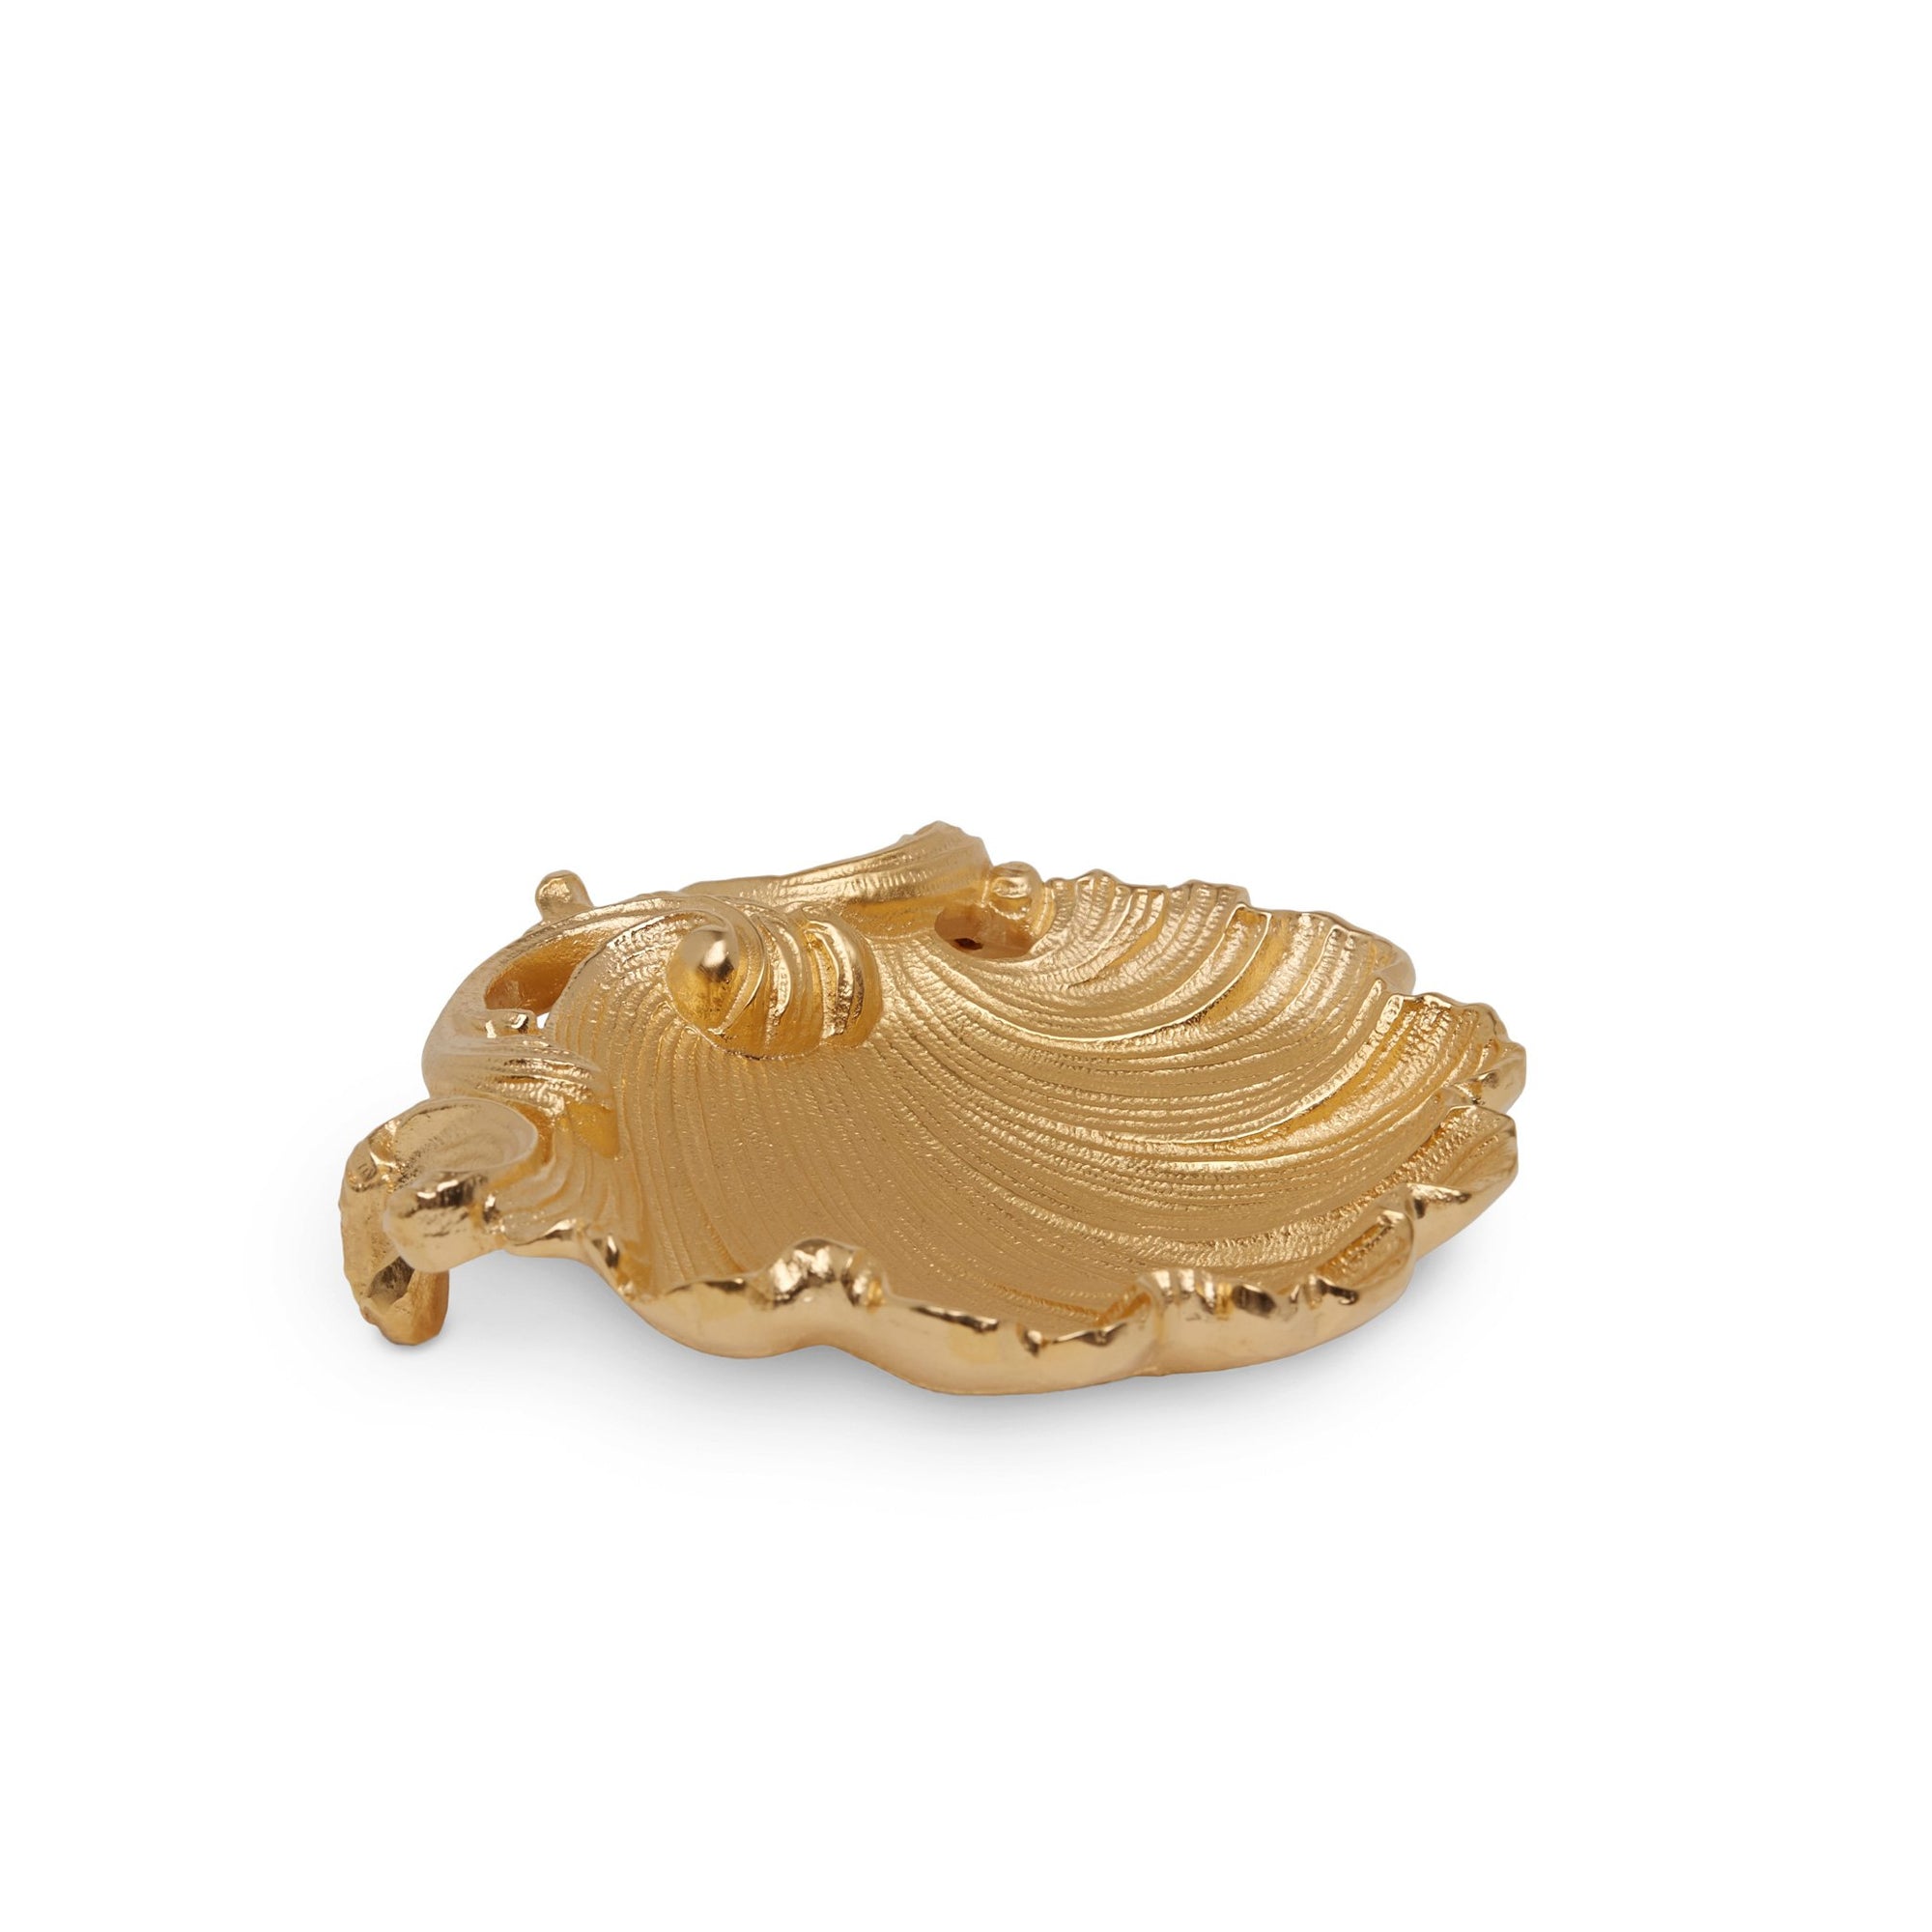 3330-GP Sherle Wagner International Rococo Shell Soap Dish in Gold Plate